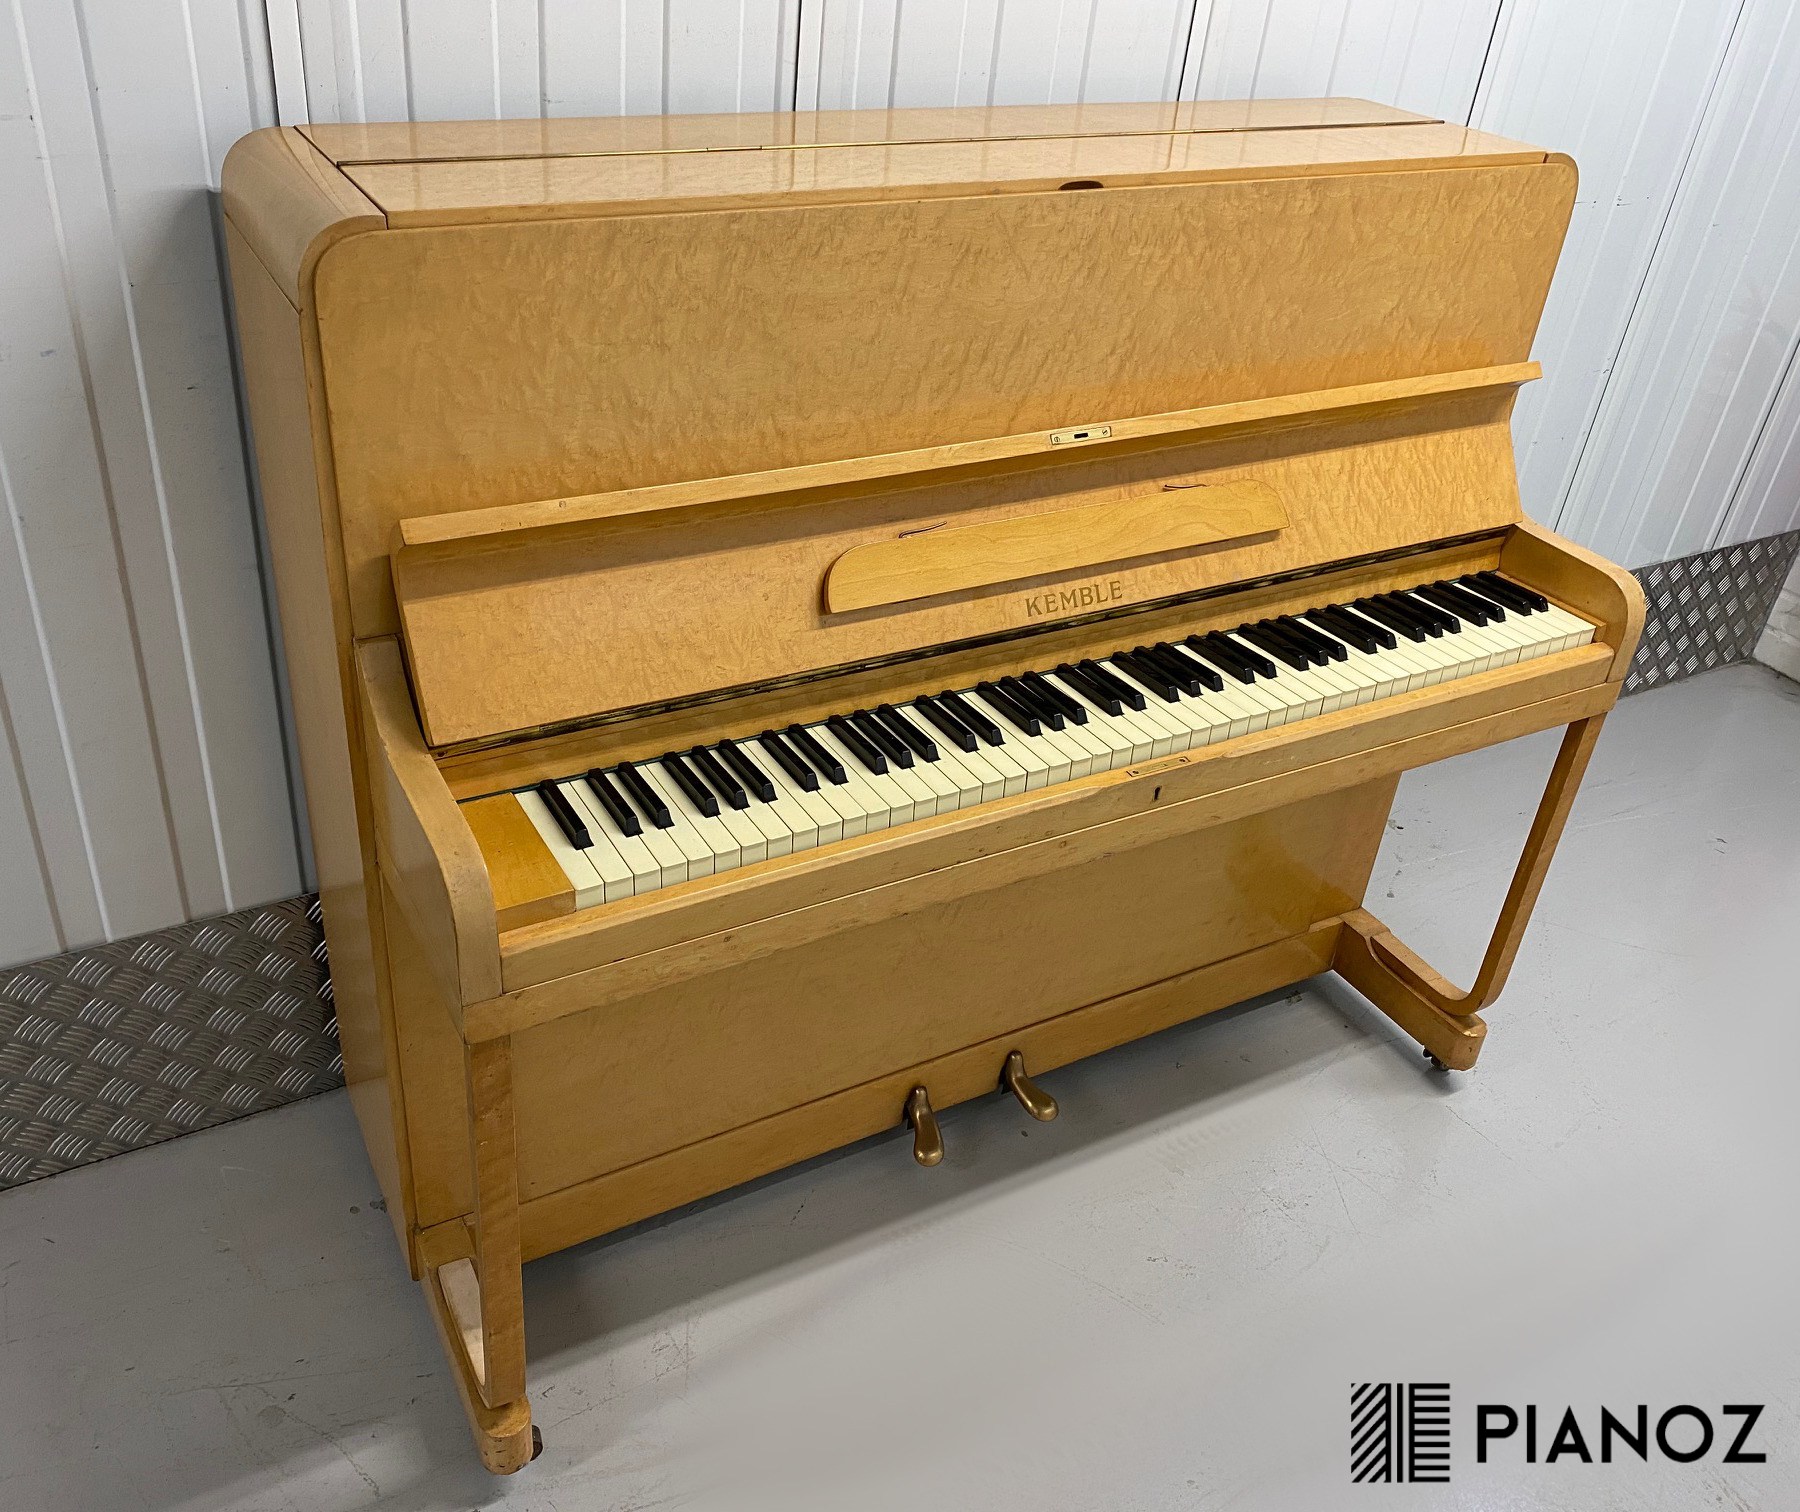 Kemble Birds Eye Maple Upright Piano piano for sale in UK